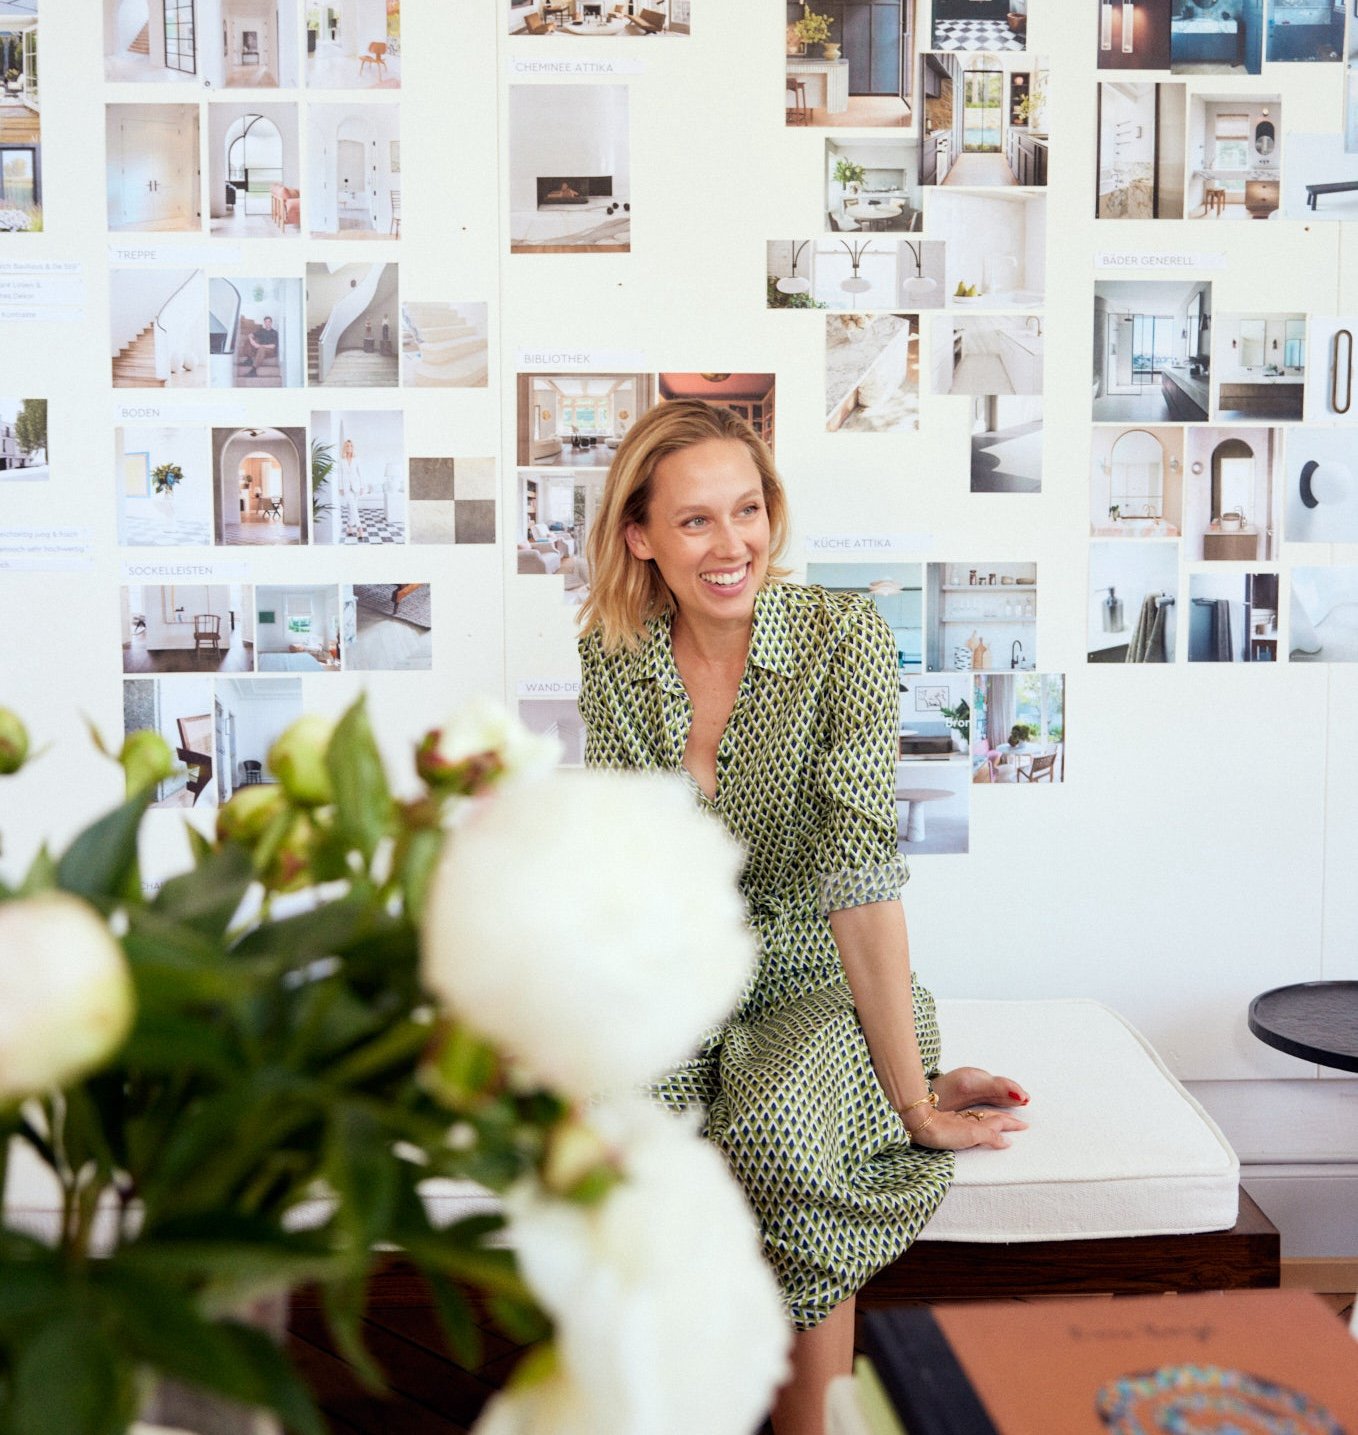 Leslie, co-founder of Spring Concepts, at our office in Zurich.